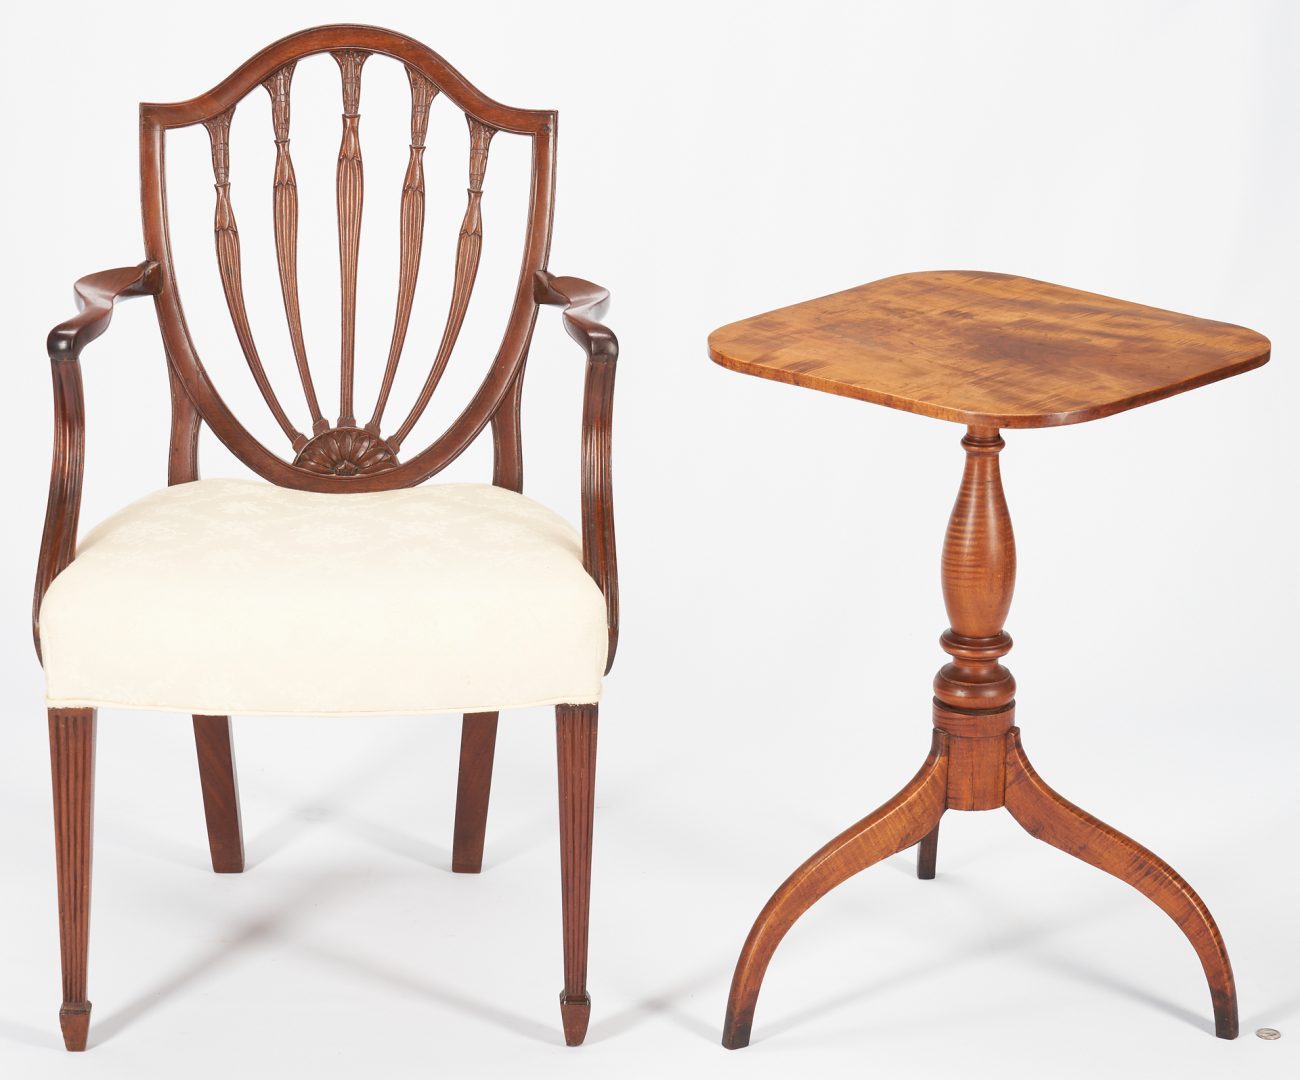 Lot 573: Shield Back Hepplewhite Style Armchair & Tiger Maple Candle Stand, 2 items